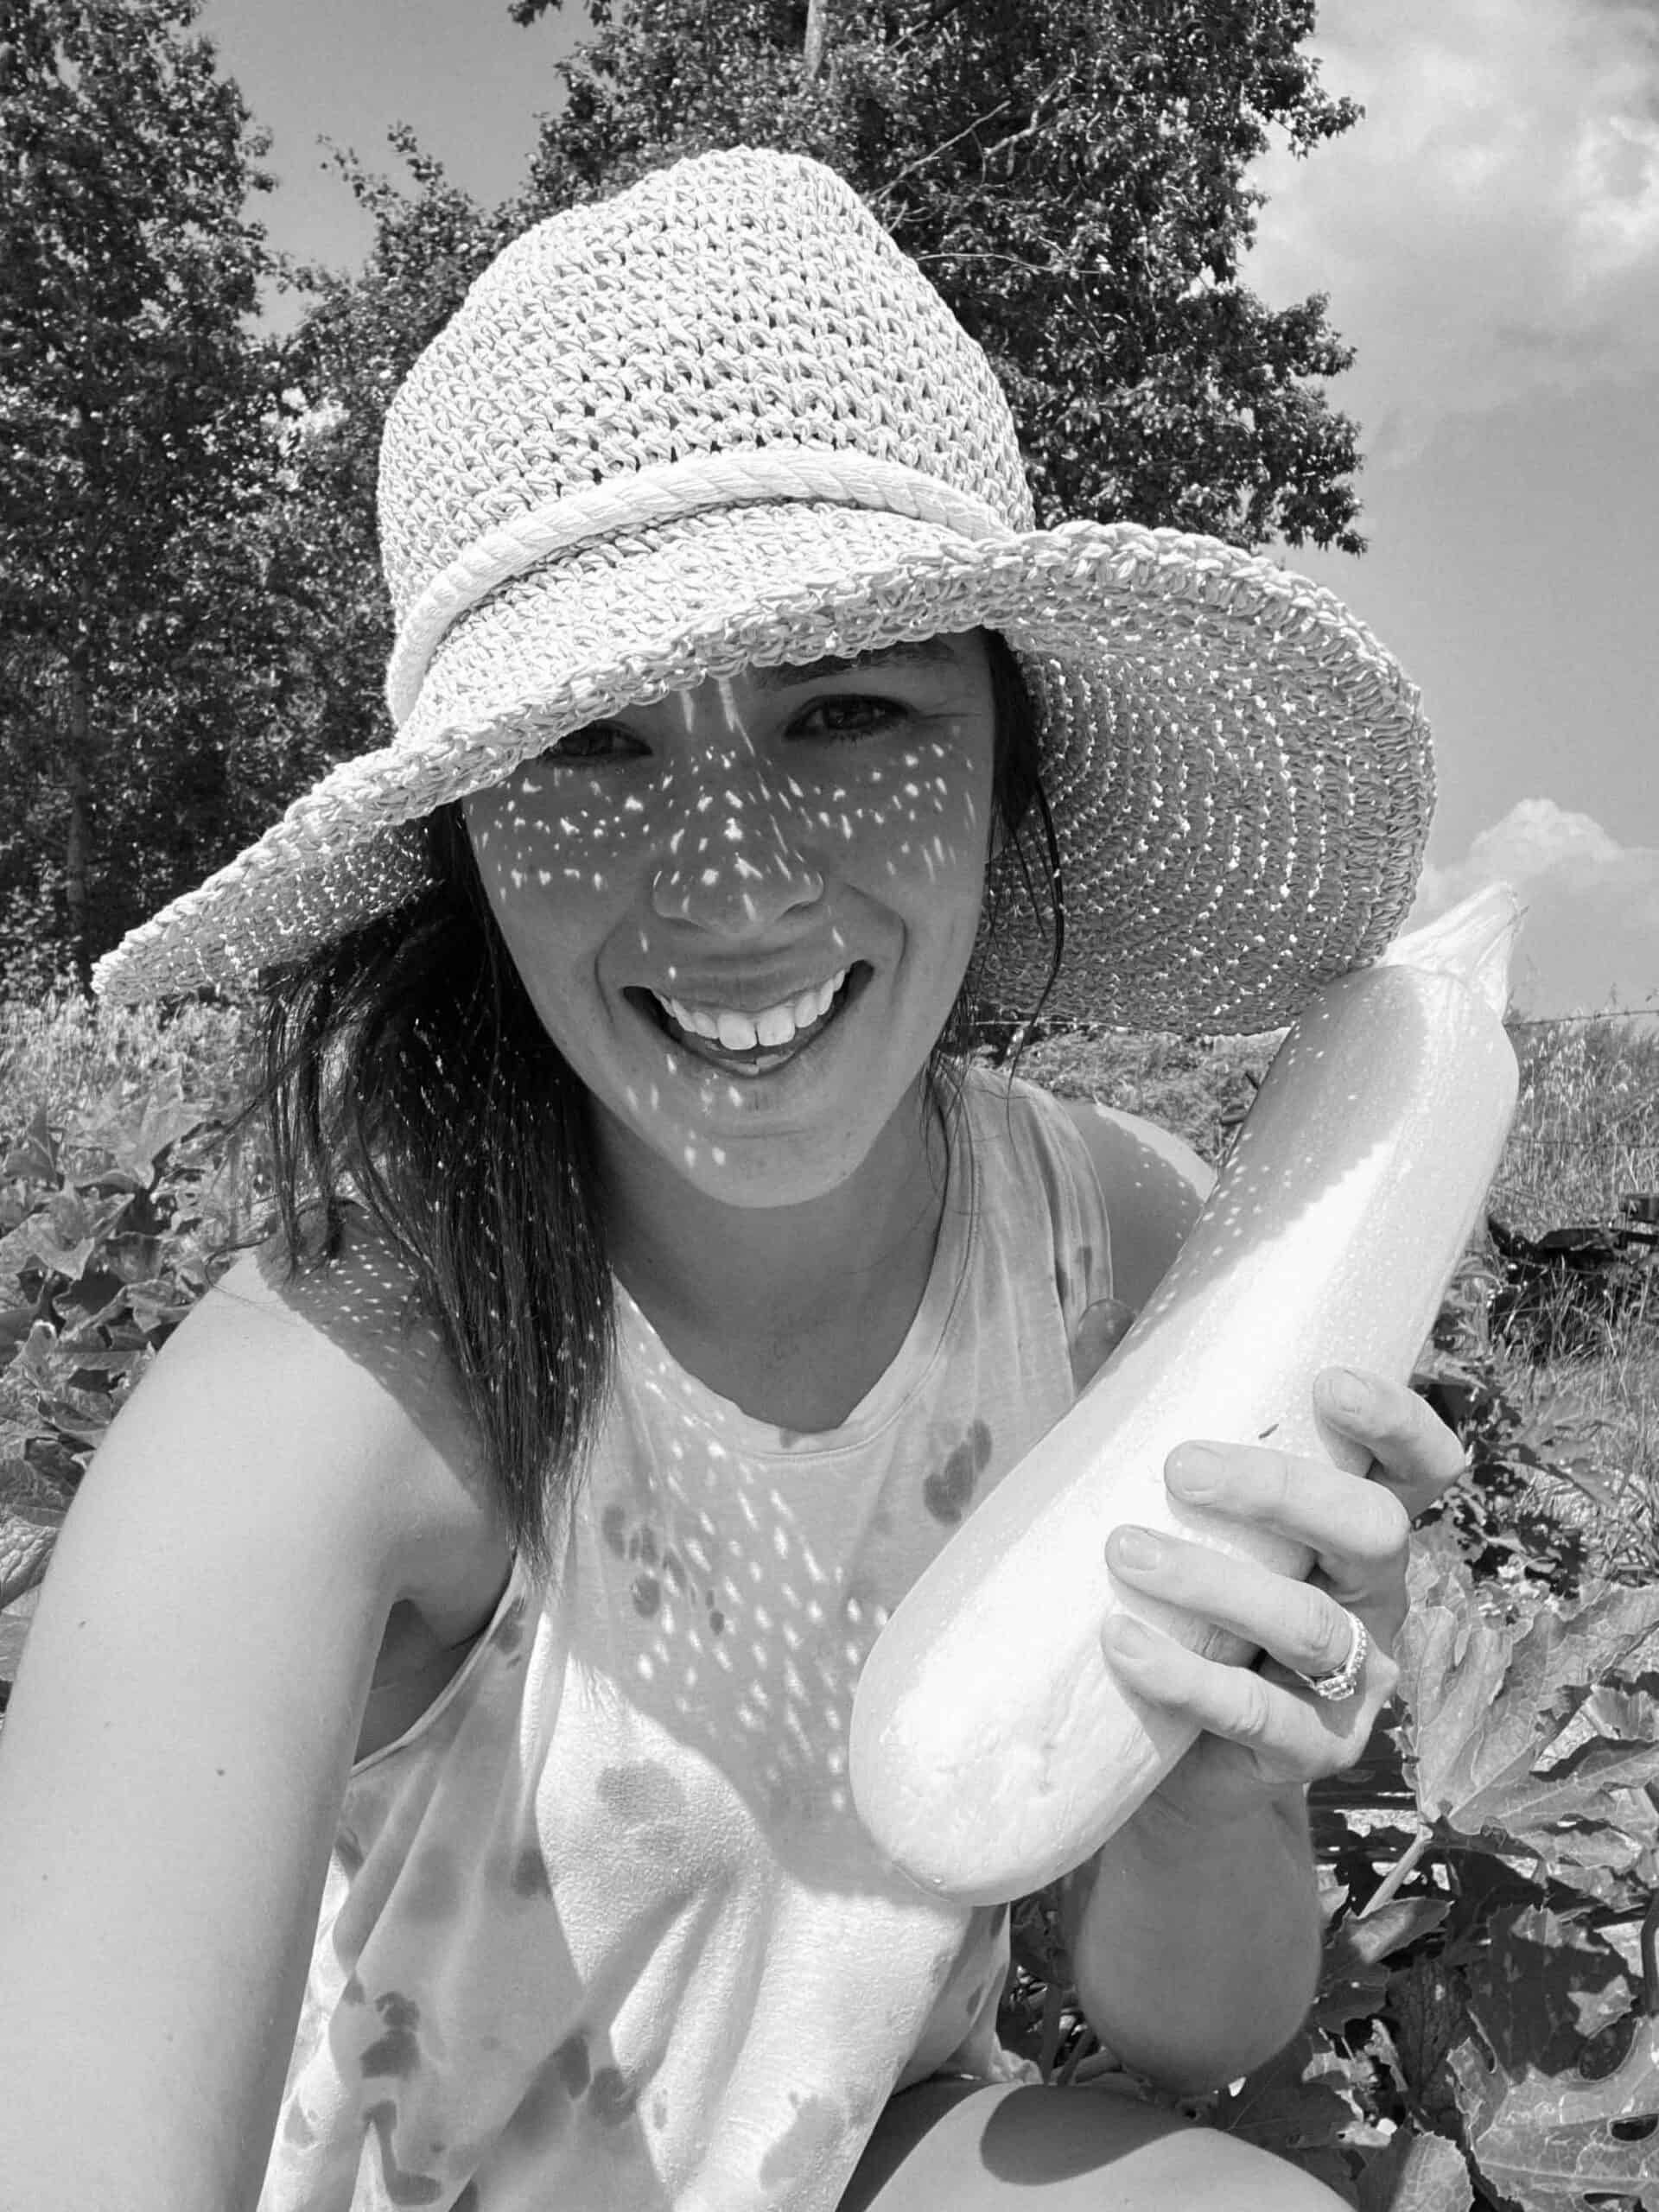 Kate (content creator) holding a zucchini in the garden with a large floppy hat.